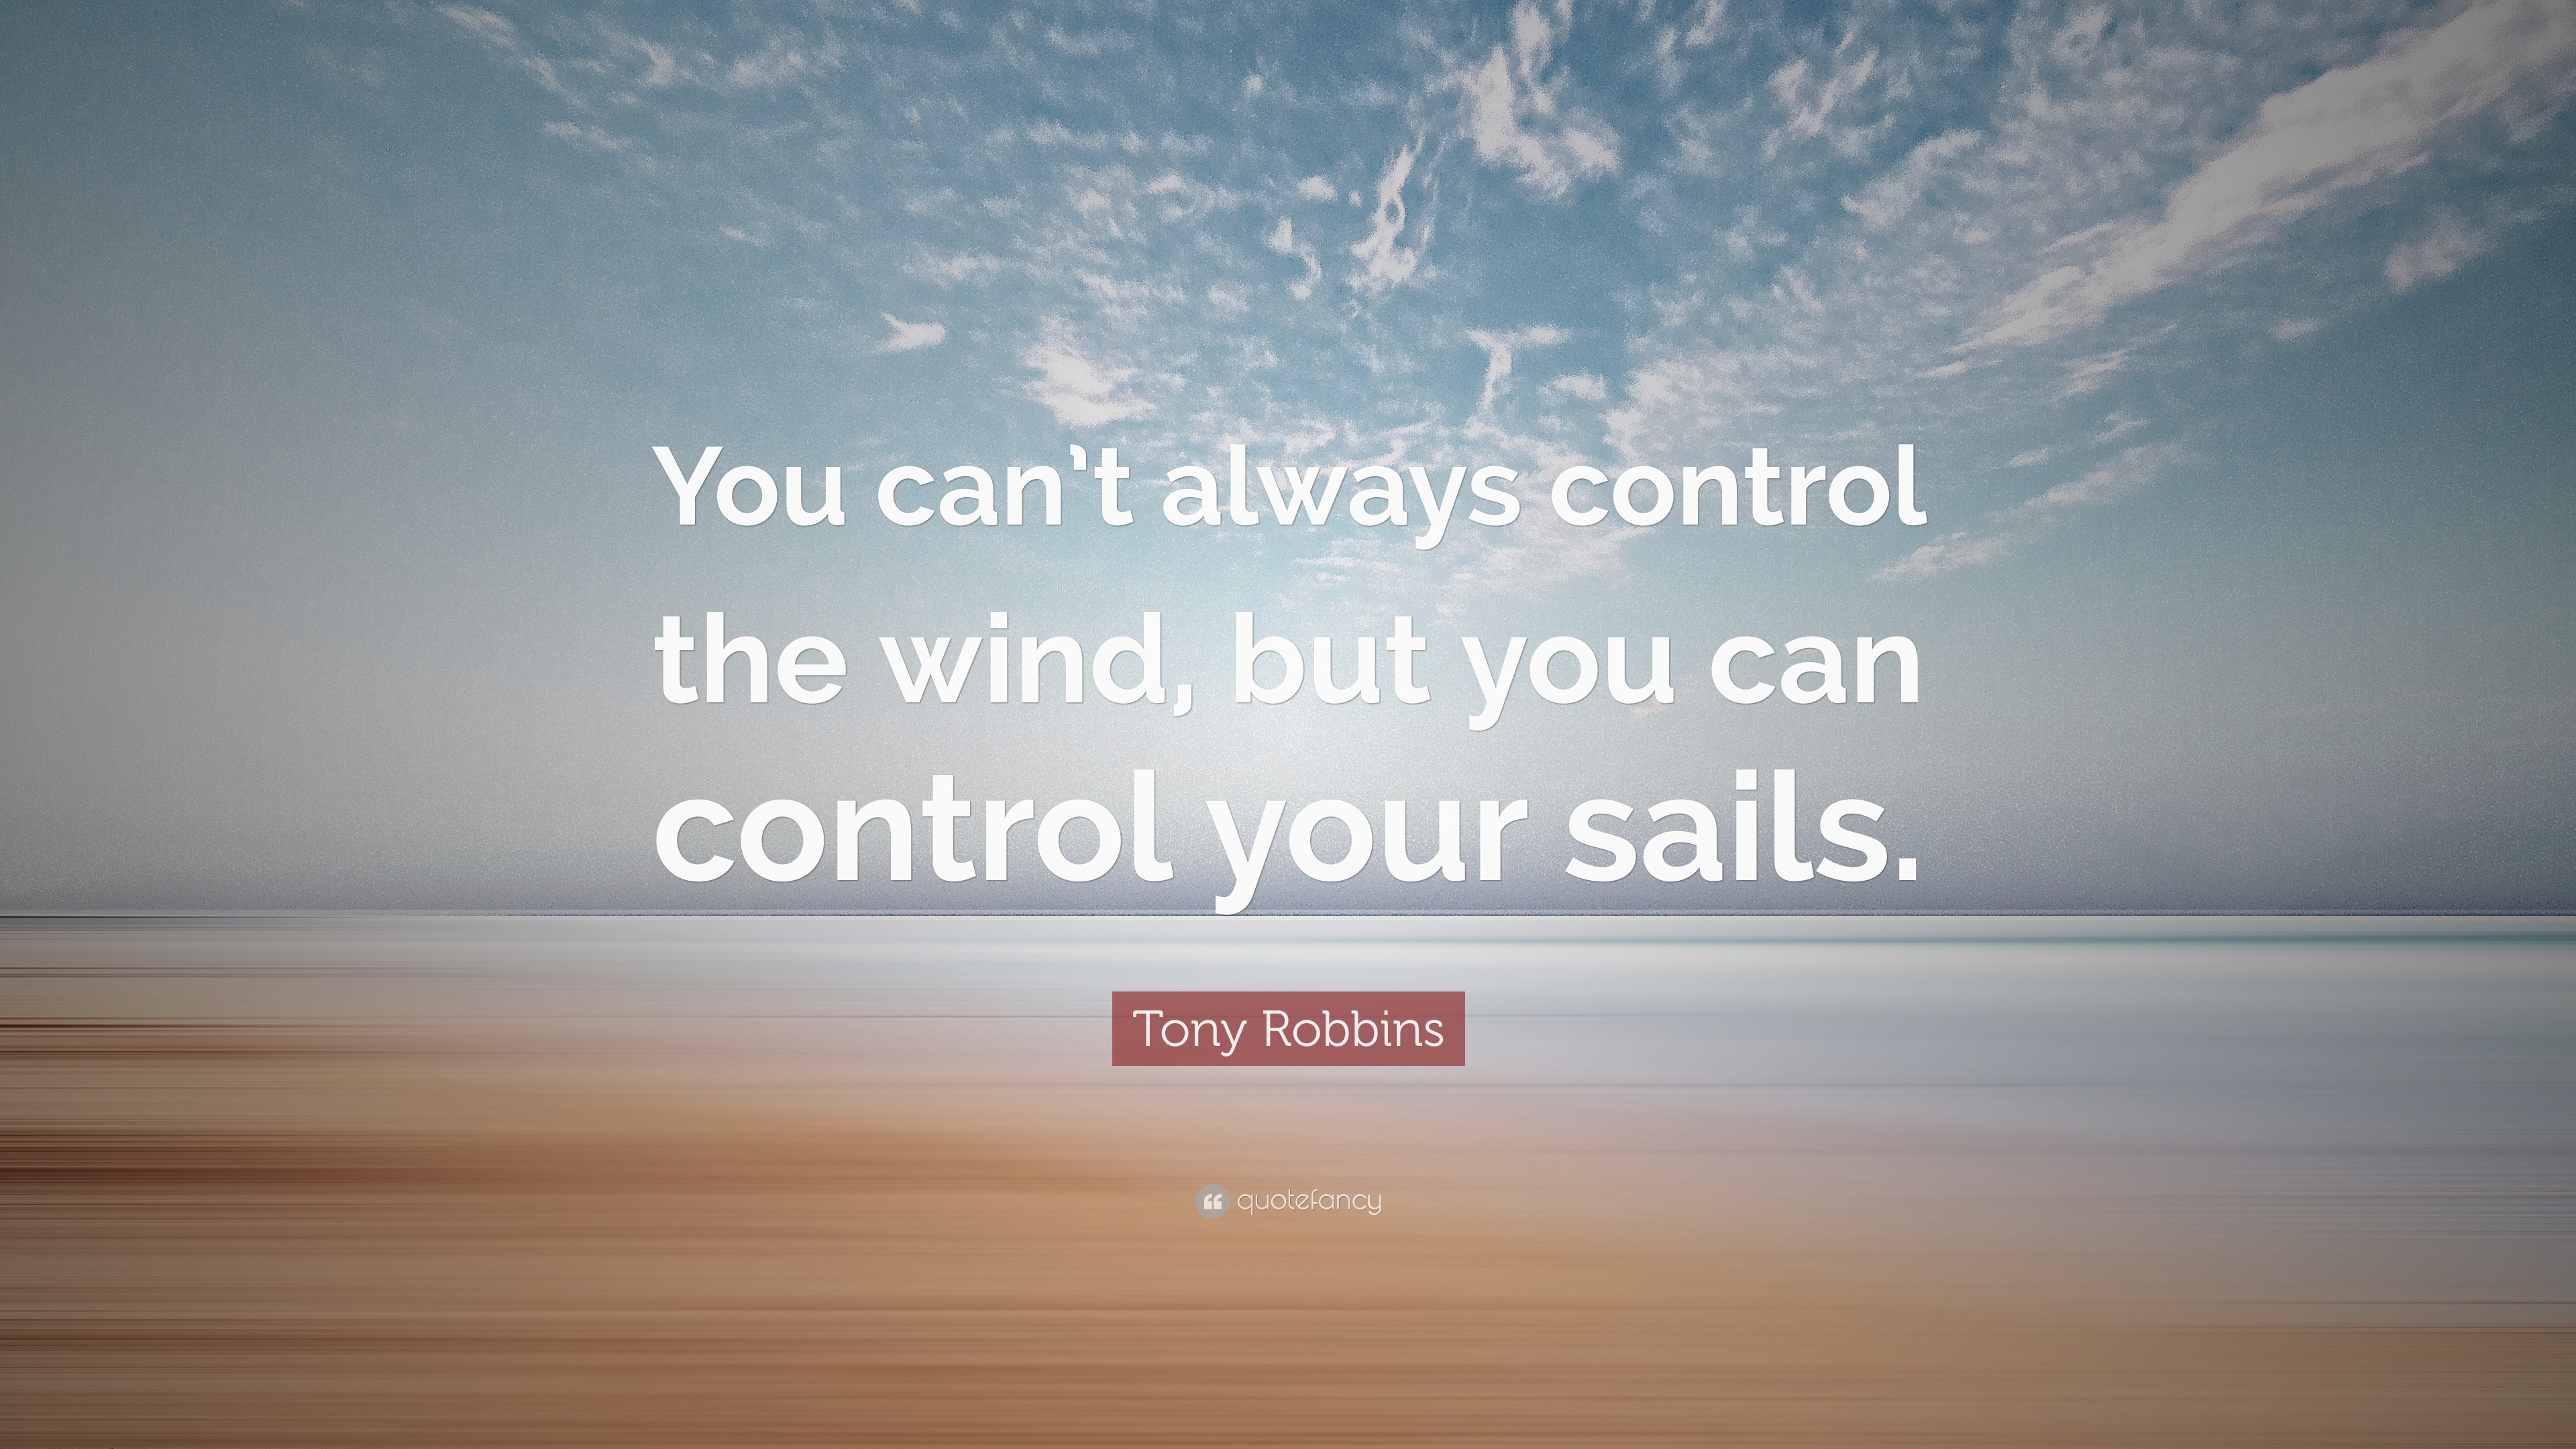 Tony Robbins Quote: “You can’t always control the wind, but you can ...